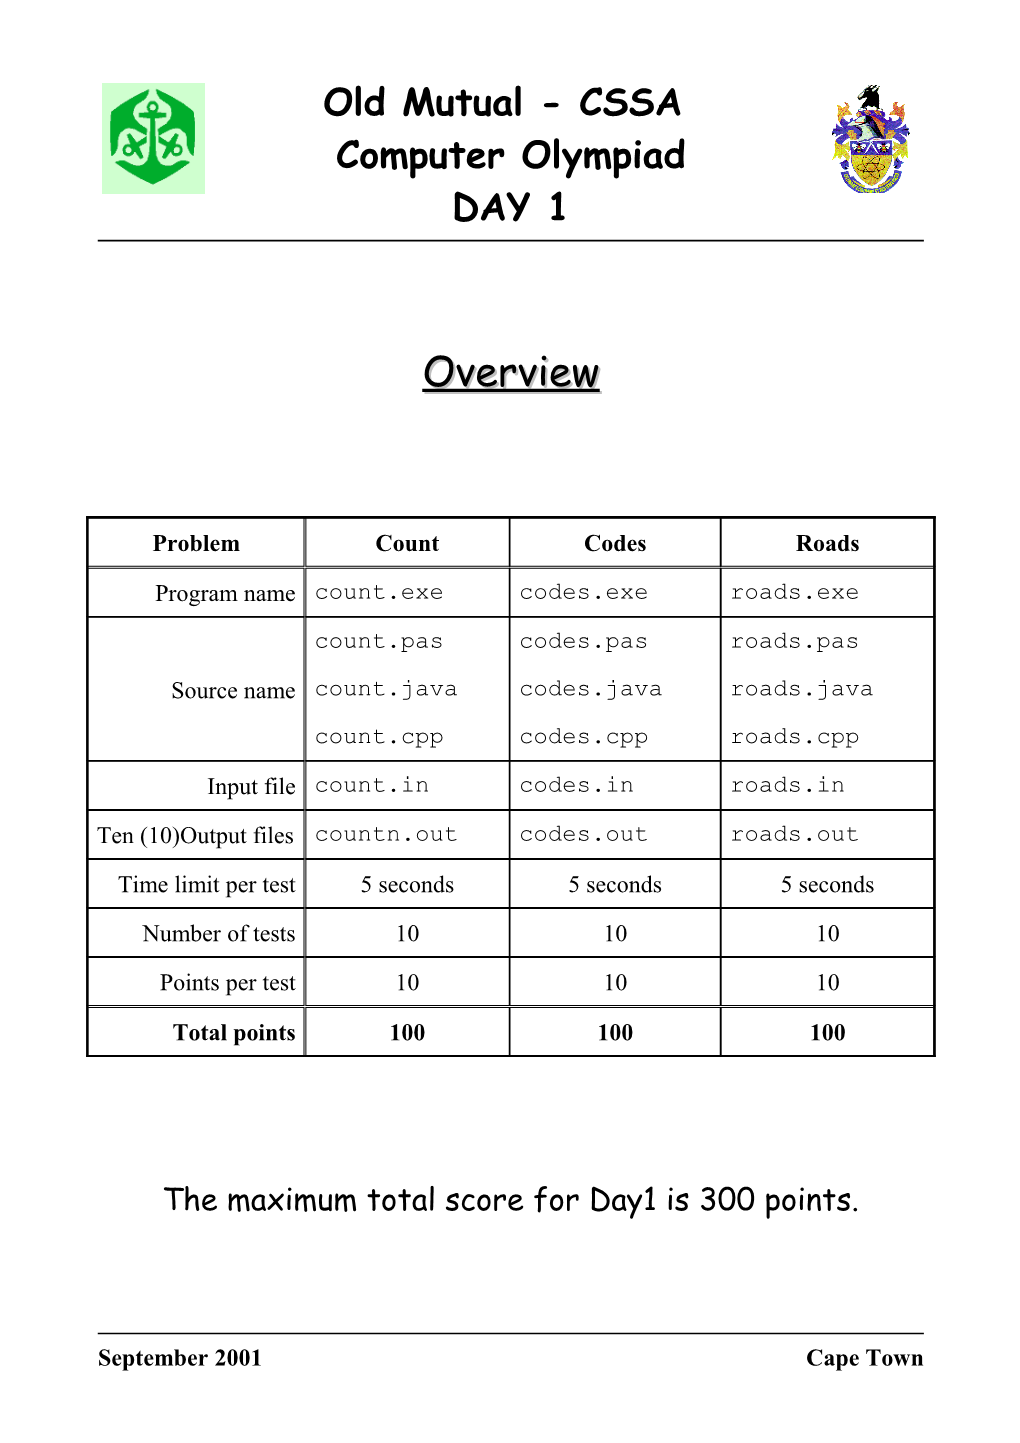 The Maximum Total Score for Day1 Is 300 Points